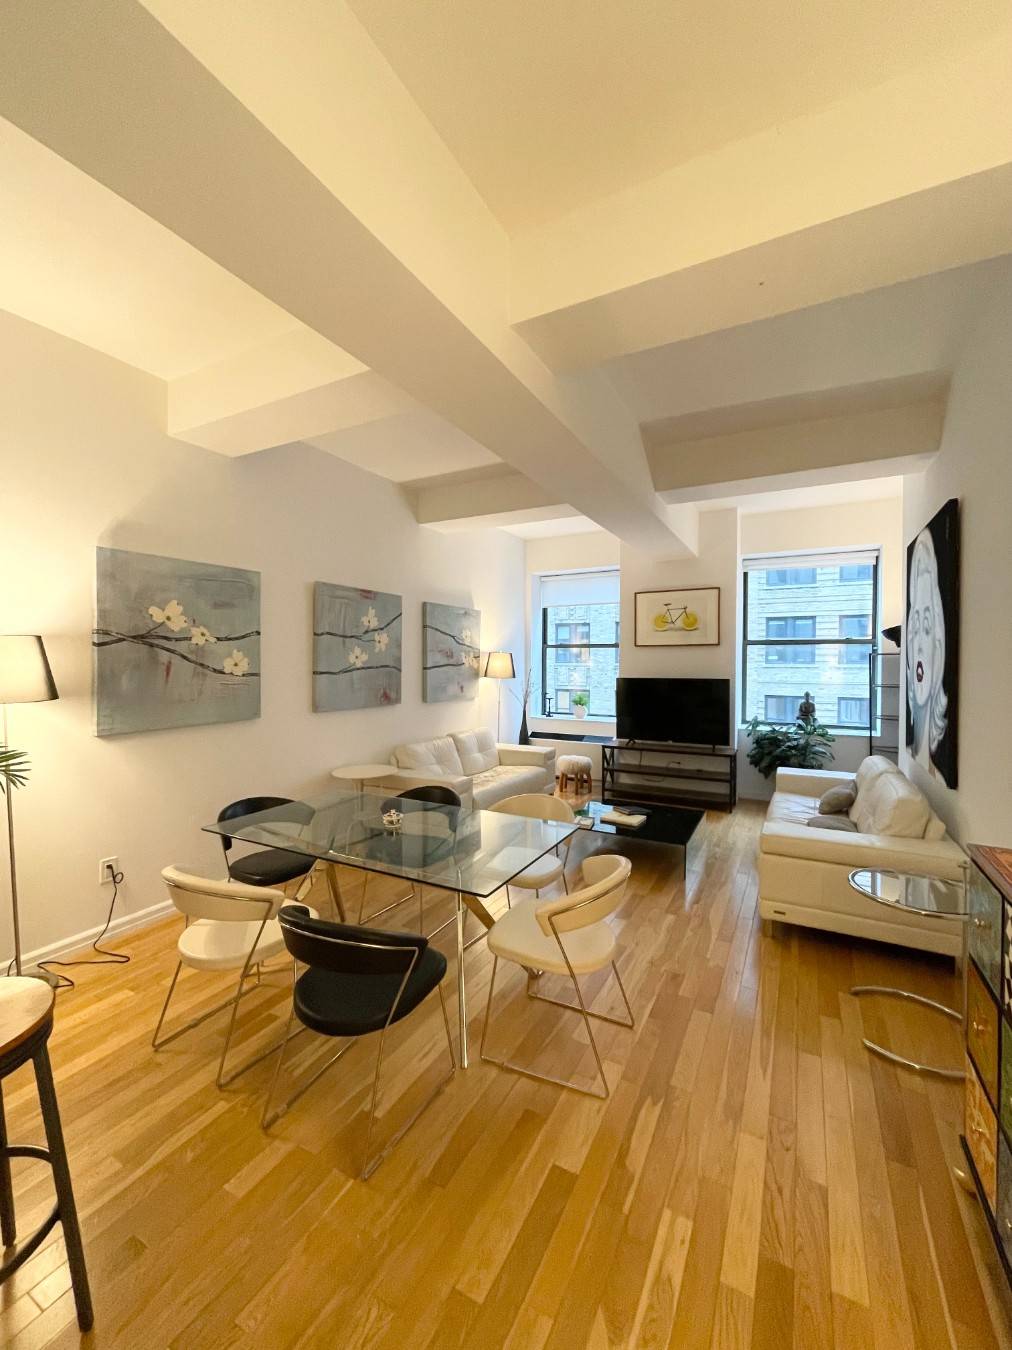 Huge luxury condo loft apartment 690sf with separate sleeping alcove.